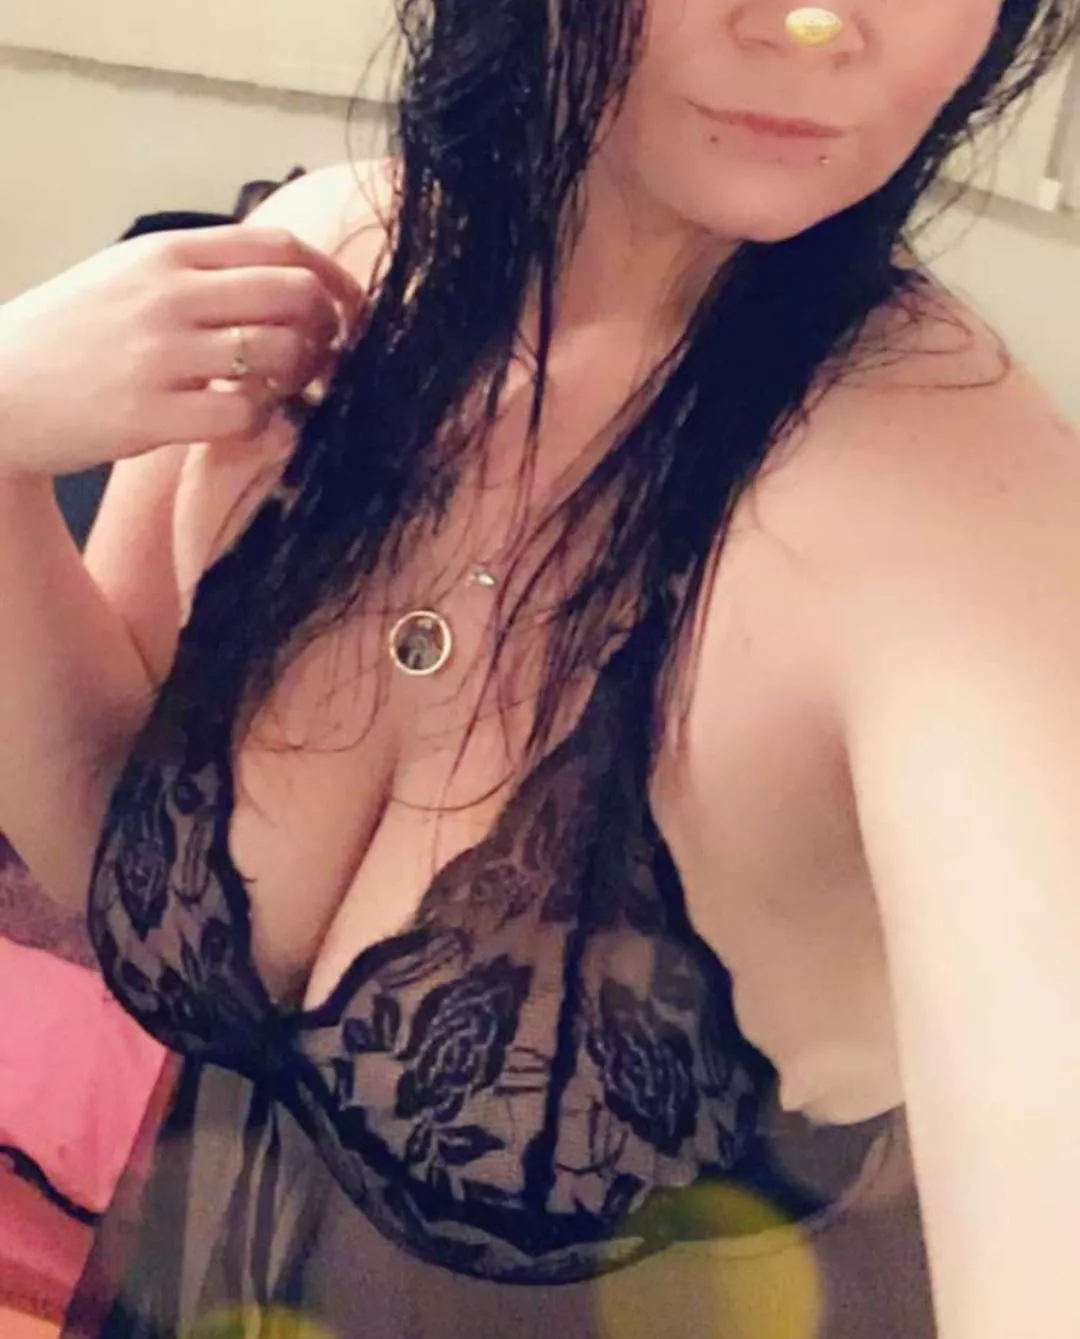 My girlfriend has been nother but a cock tease nudes in Cuckold Onlynudes